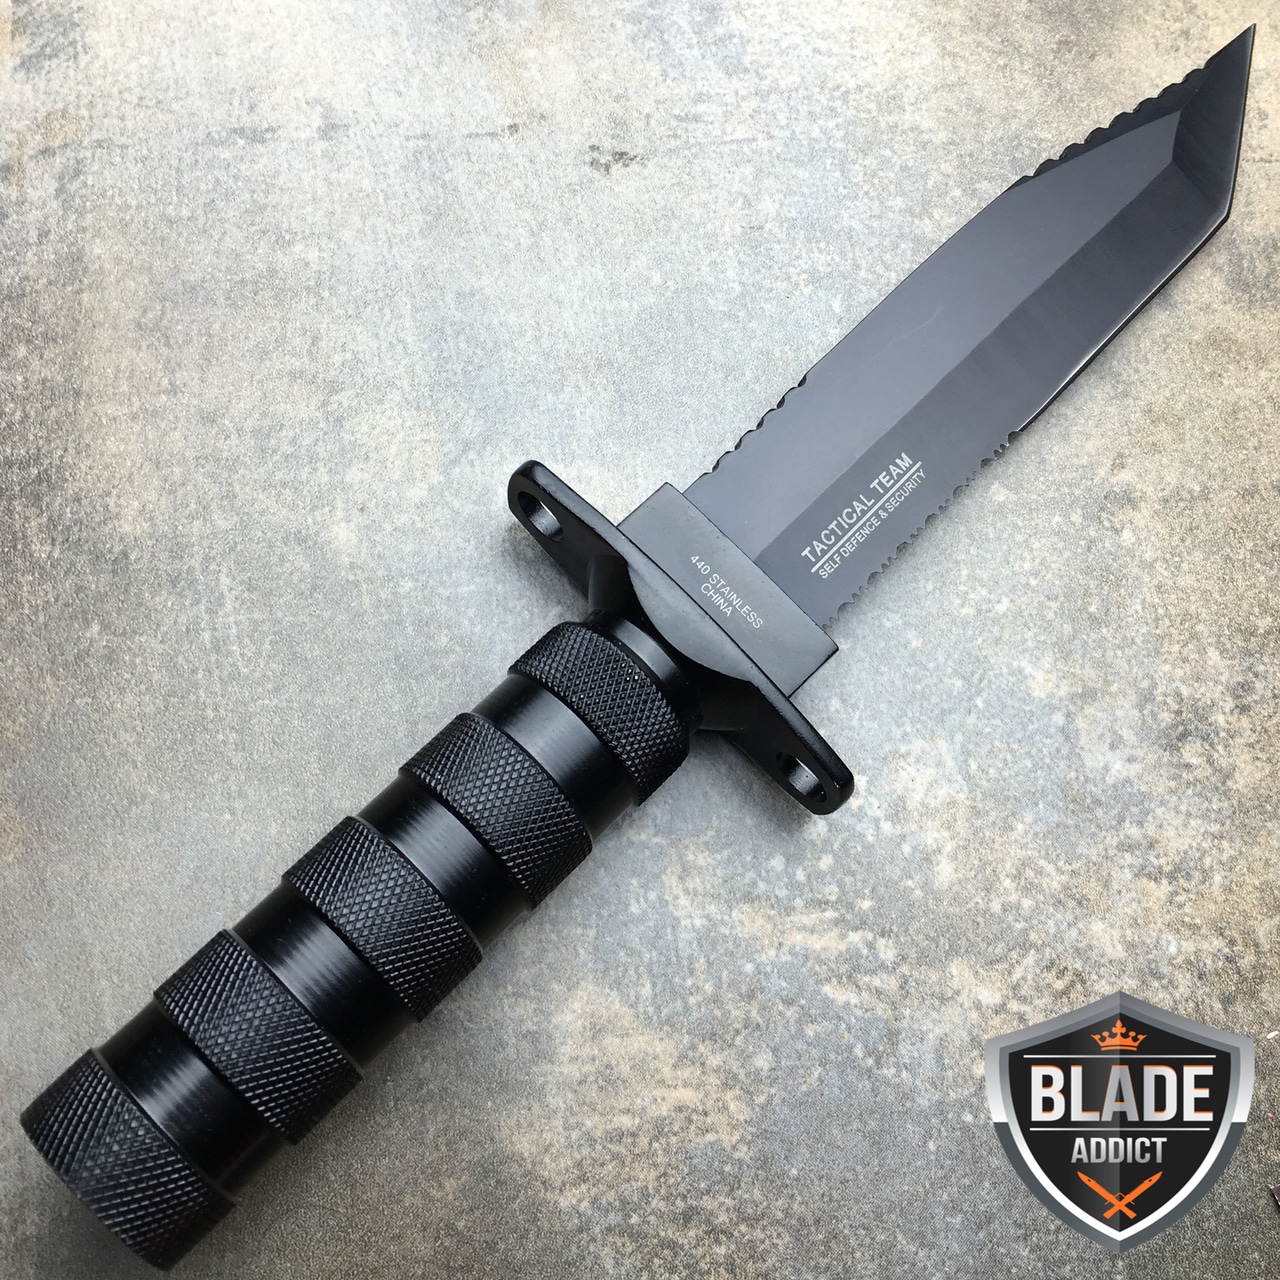 12" Tactical TANTO Hunting Rambo Fixed Blade Knife Machete Bowie Survival